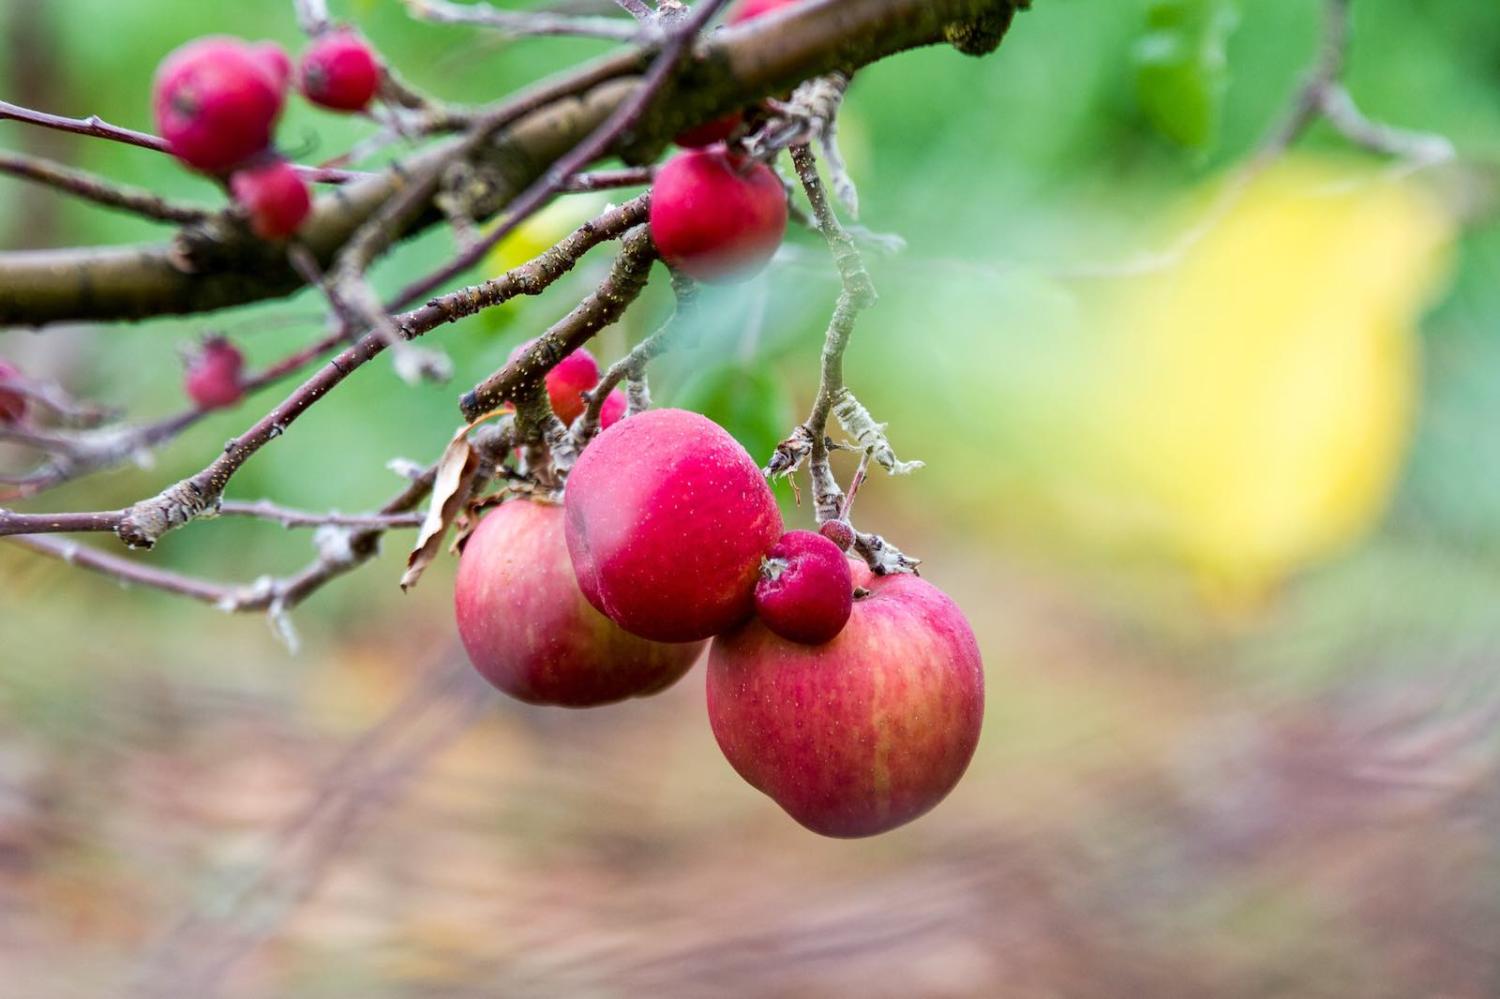 Apples in the Huon valley, Tasmania, where fruit picking would change Maria’s life (Photo: TassieEye/Flickr)